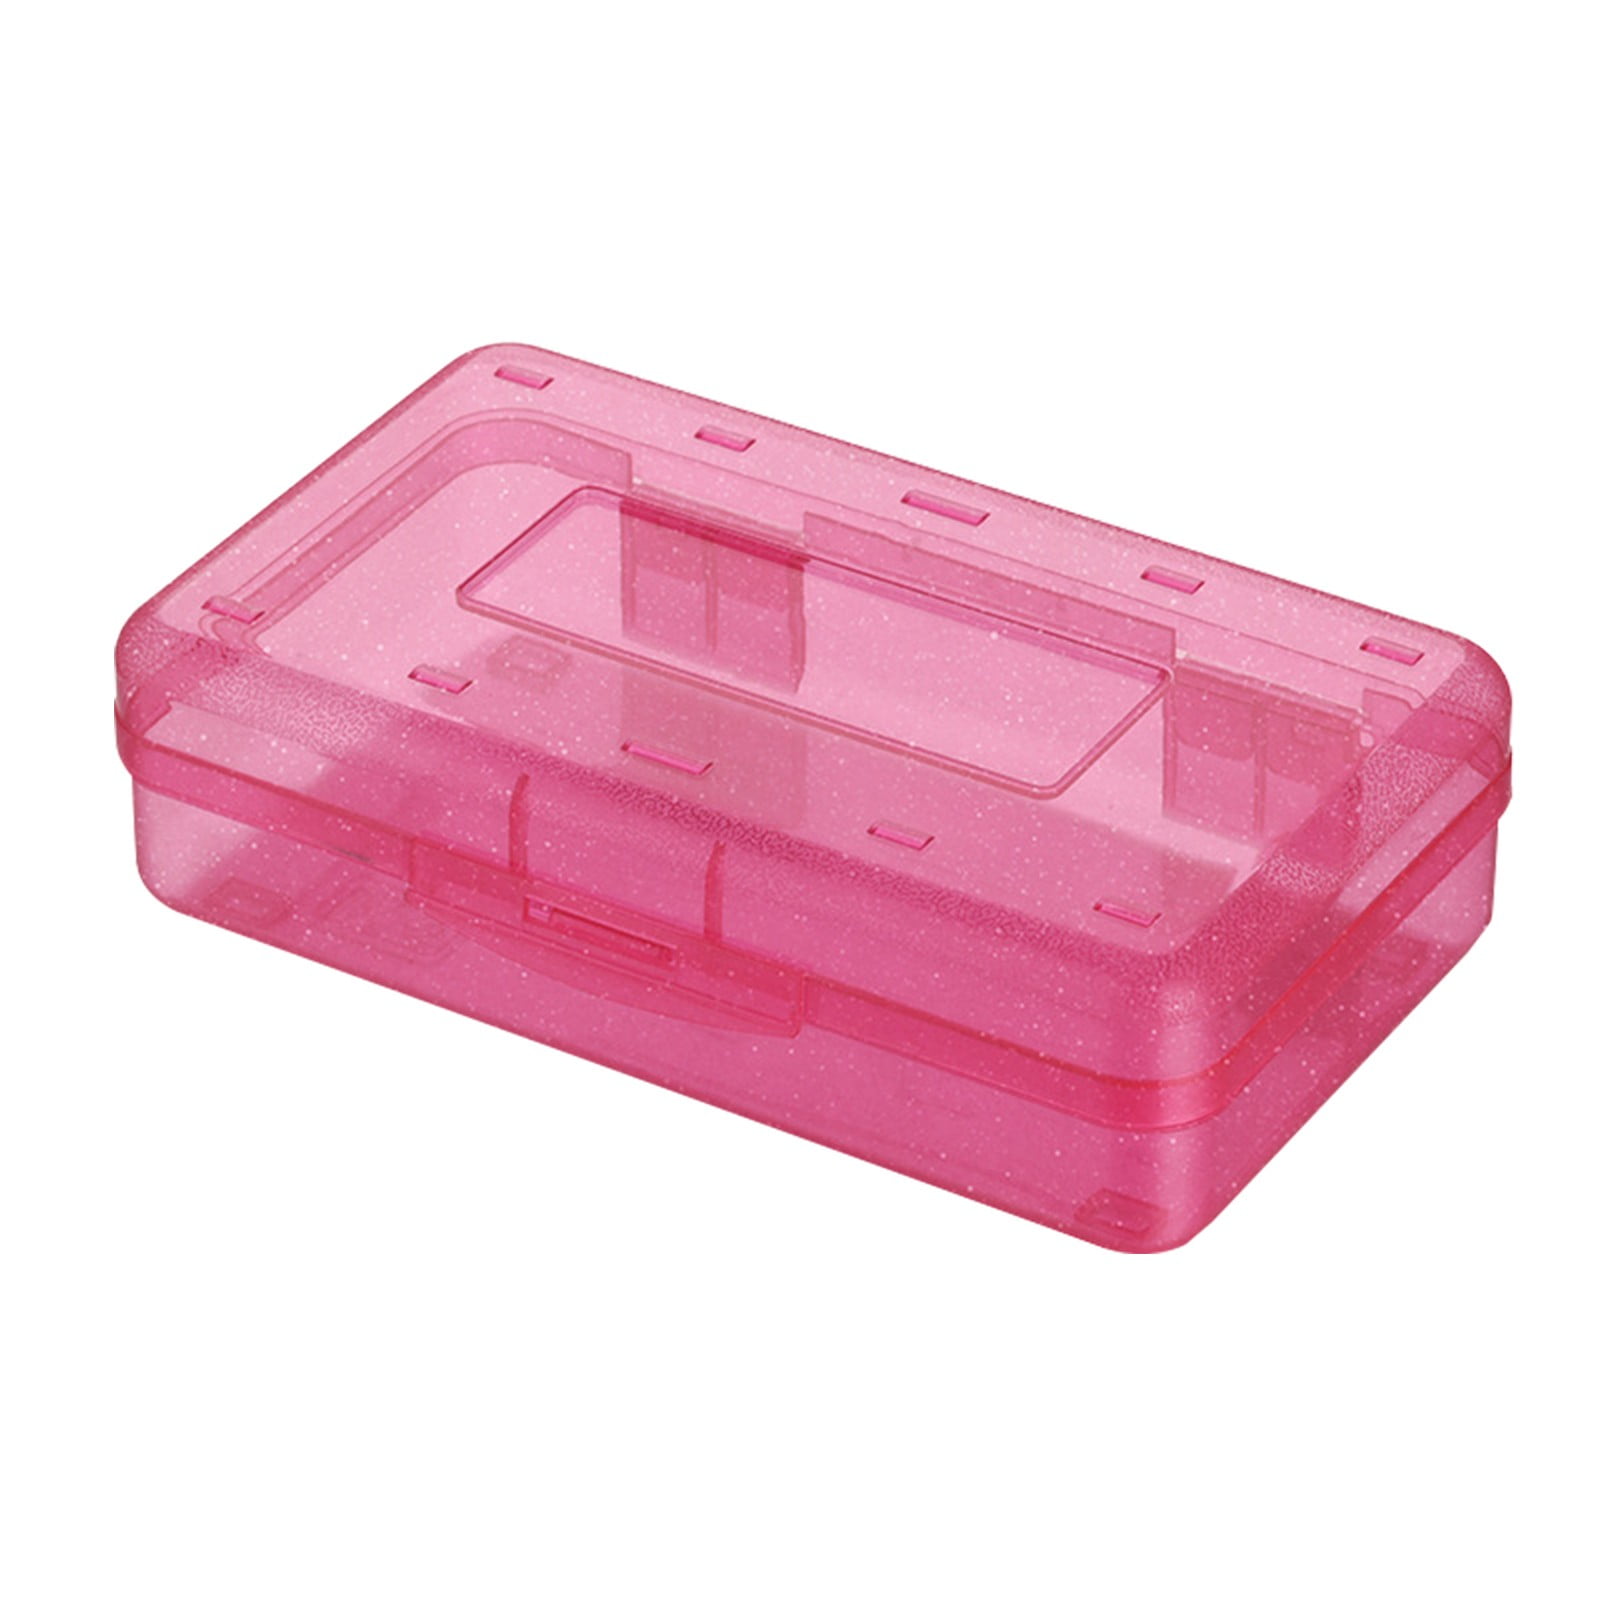 Pencil Box, Large Capacity Pencil Case,1 Pack Plastic Pencil Case Boxes,  Clear Crayon Box with Snap-tight Lid Stackable Design, Hard Pencil